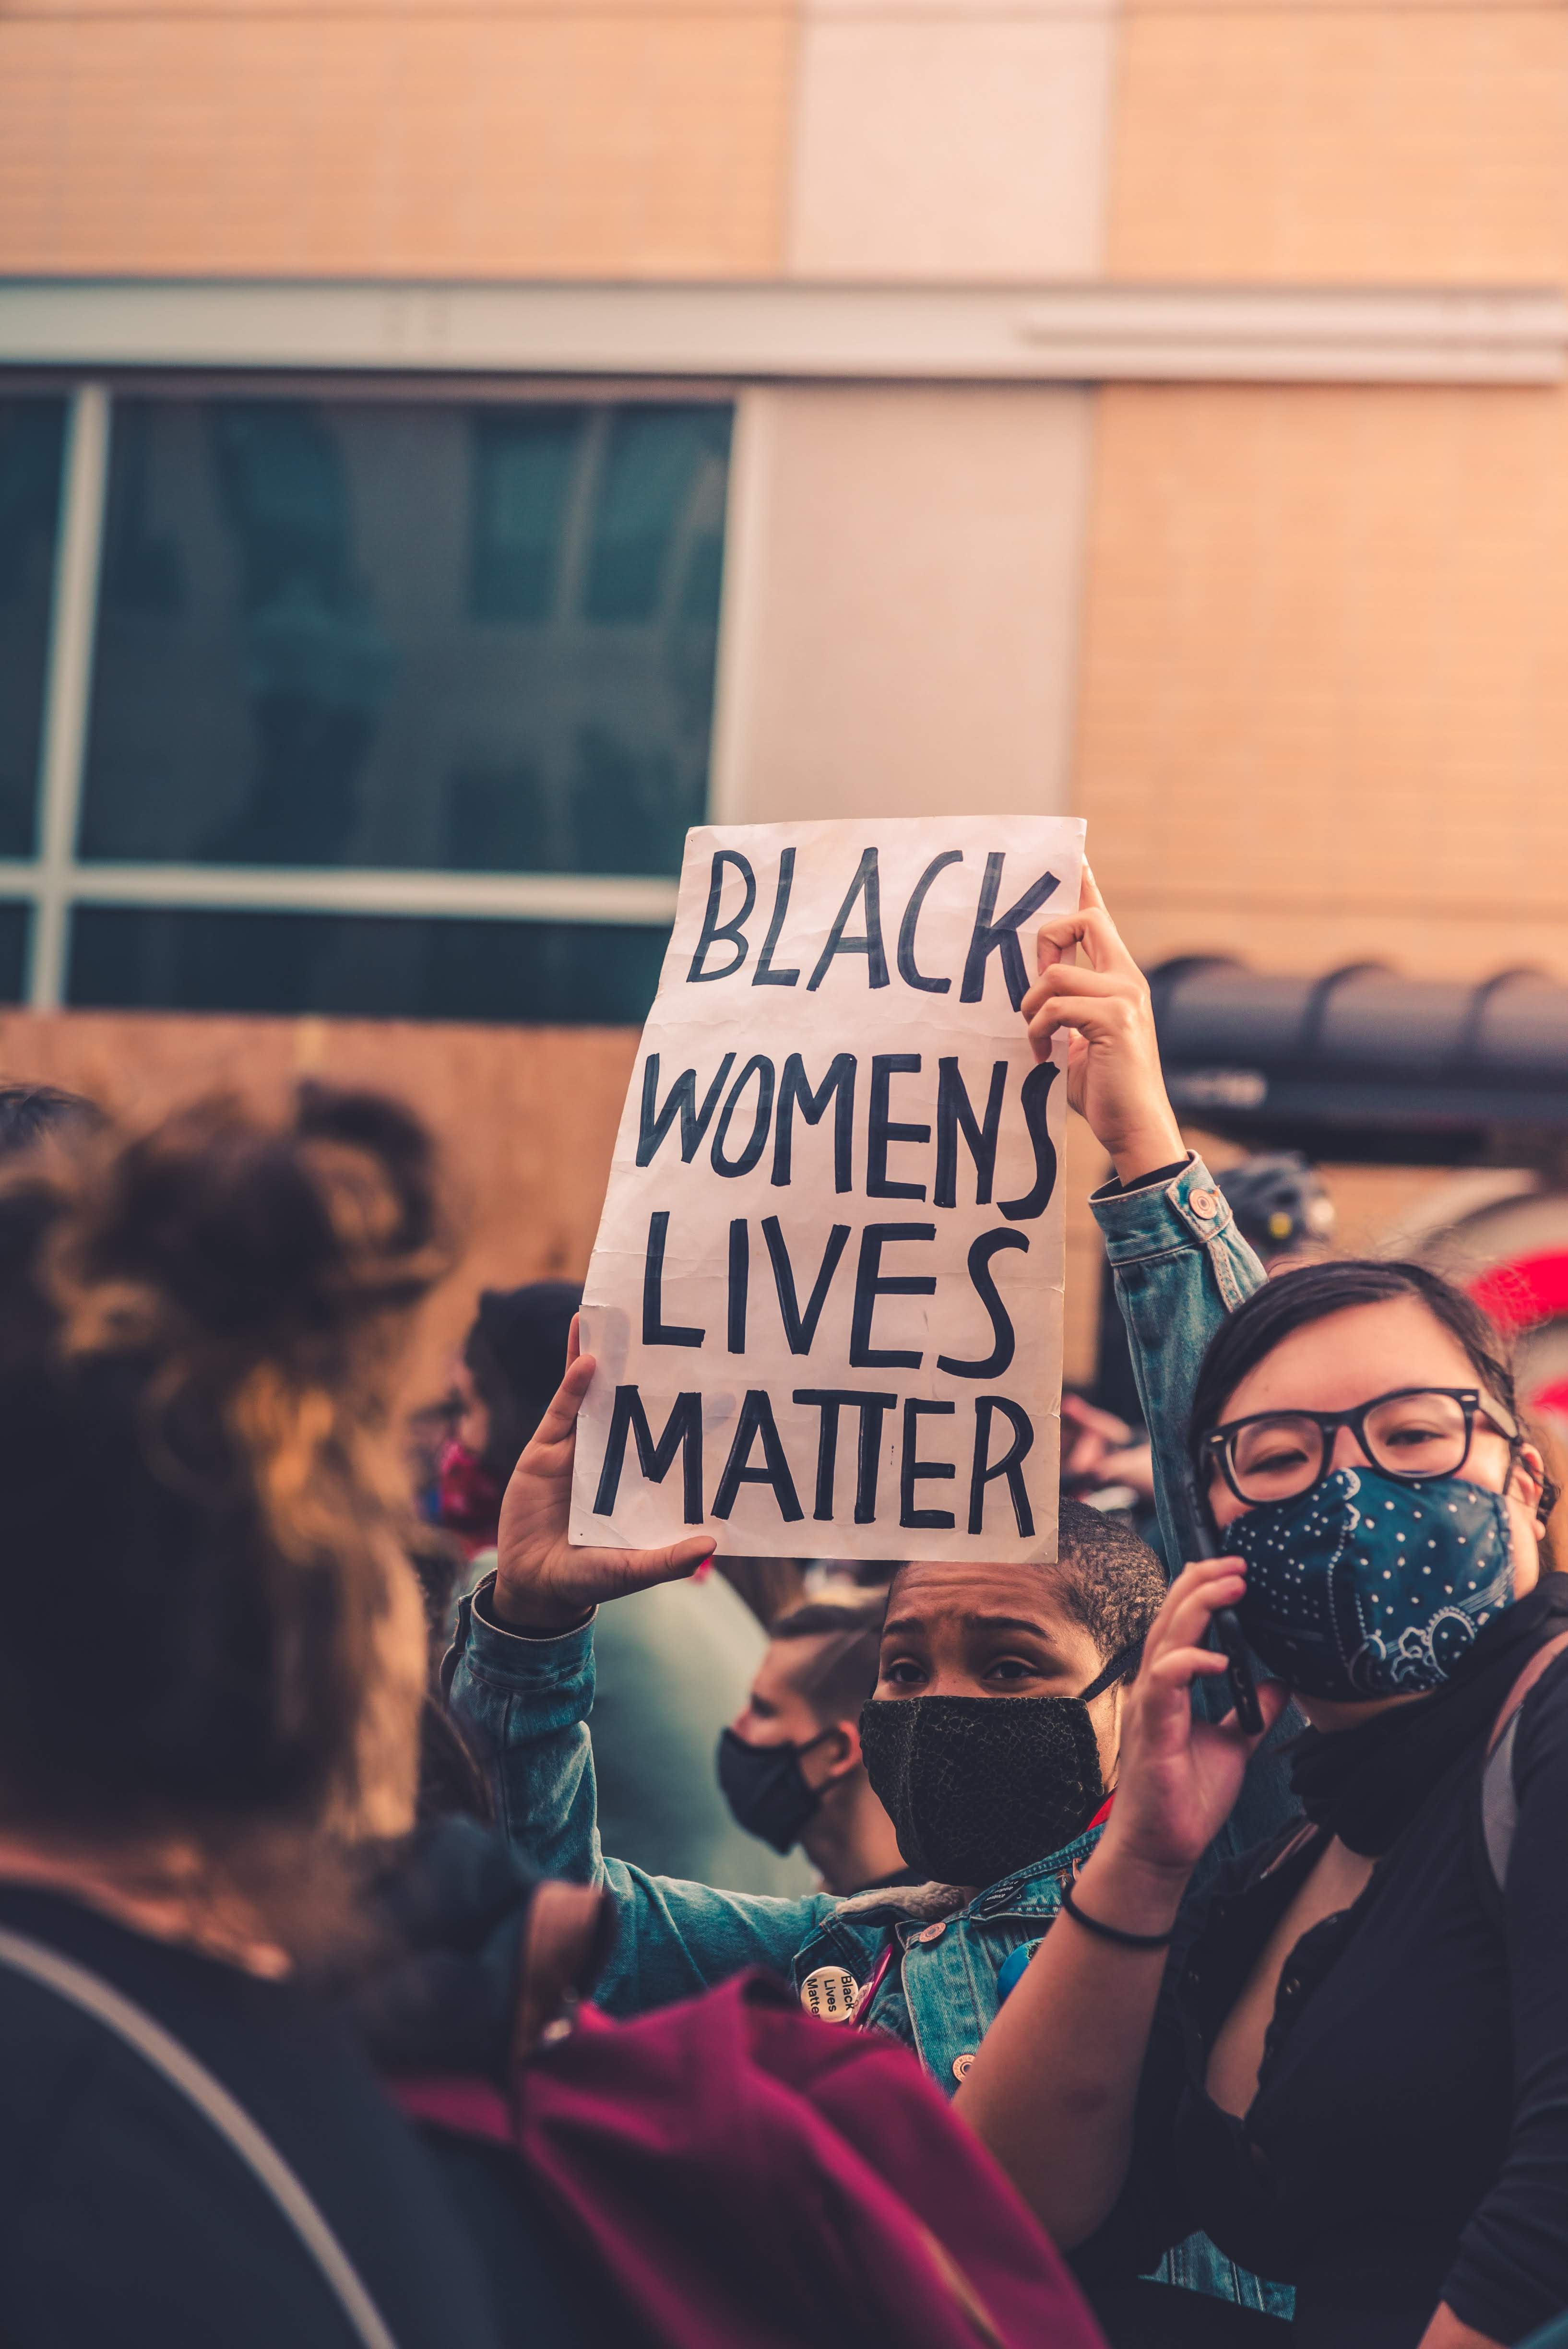 'black women's lives matter' on a sign during a protest